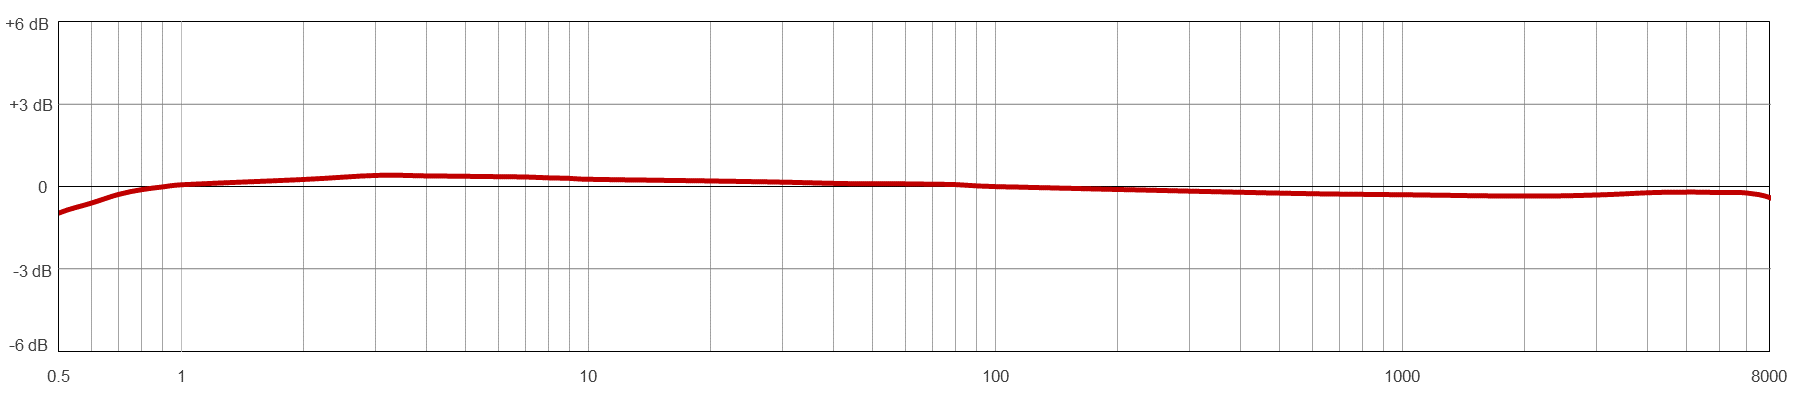 A line graph showing the frequency resopnse of a CTC AC198-M12A condition monitoring sensor.